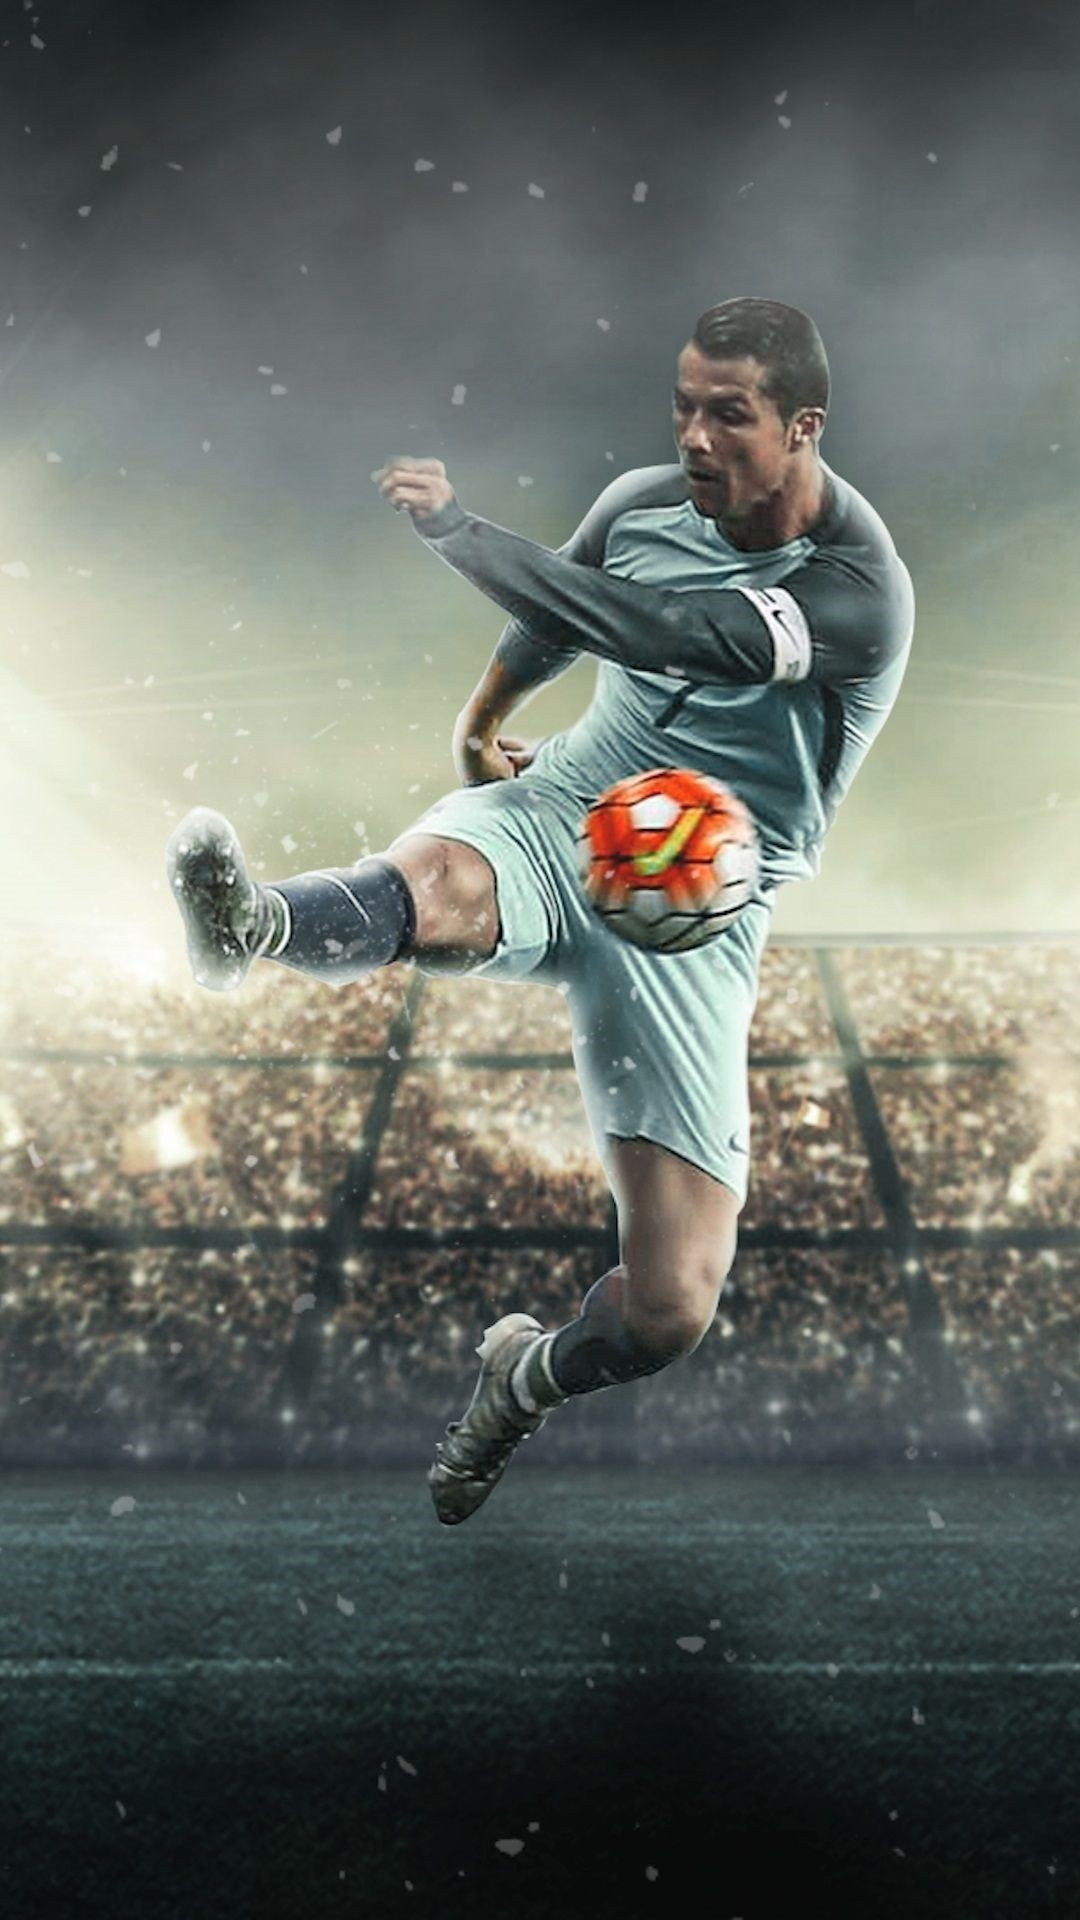 Download wallpaper 800x1200 soccer ball ball football iphone 4s4 for  parallax hd background